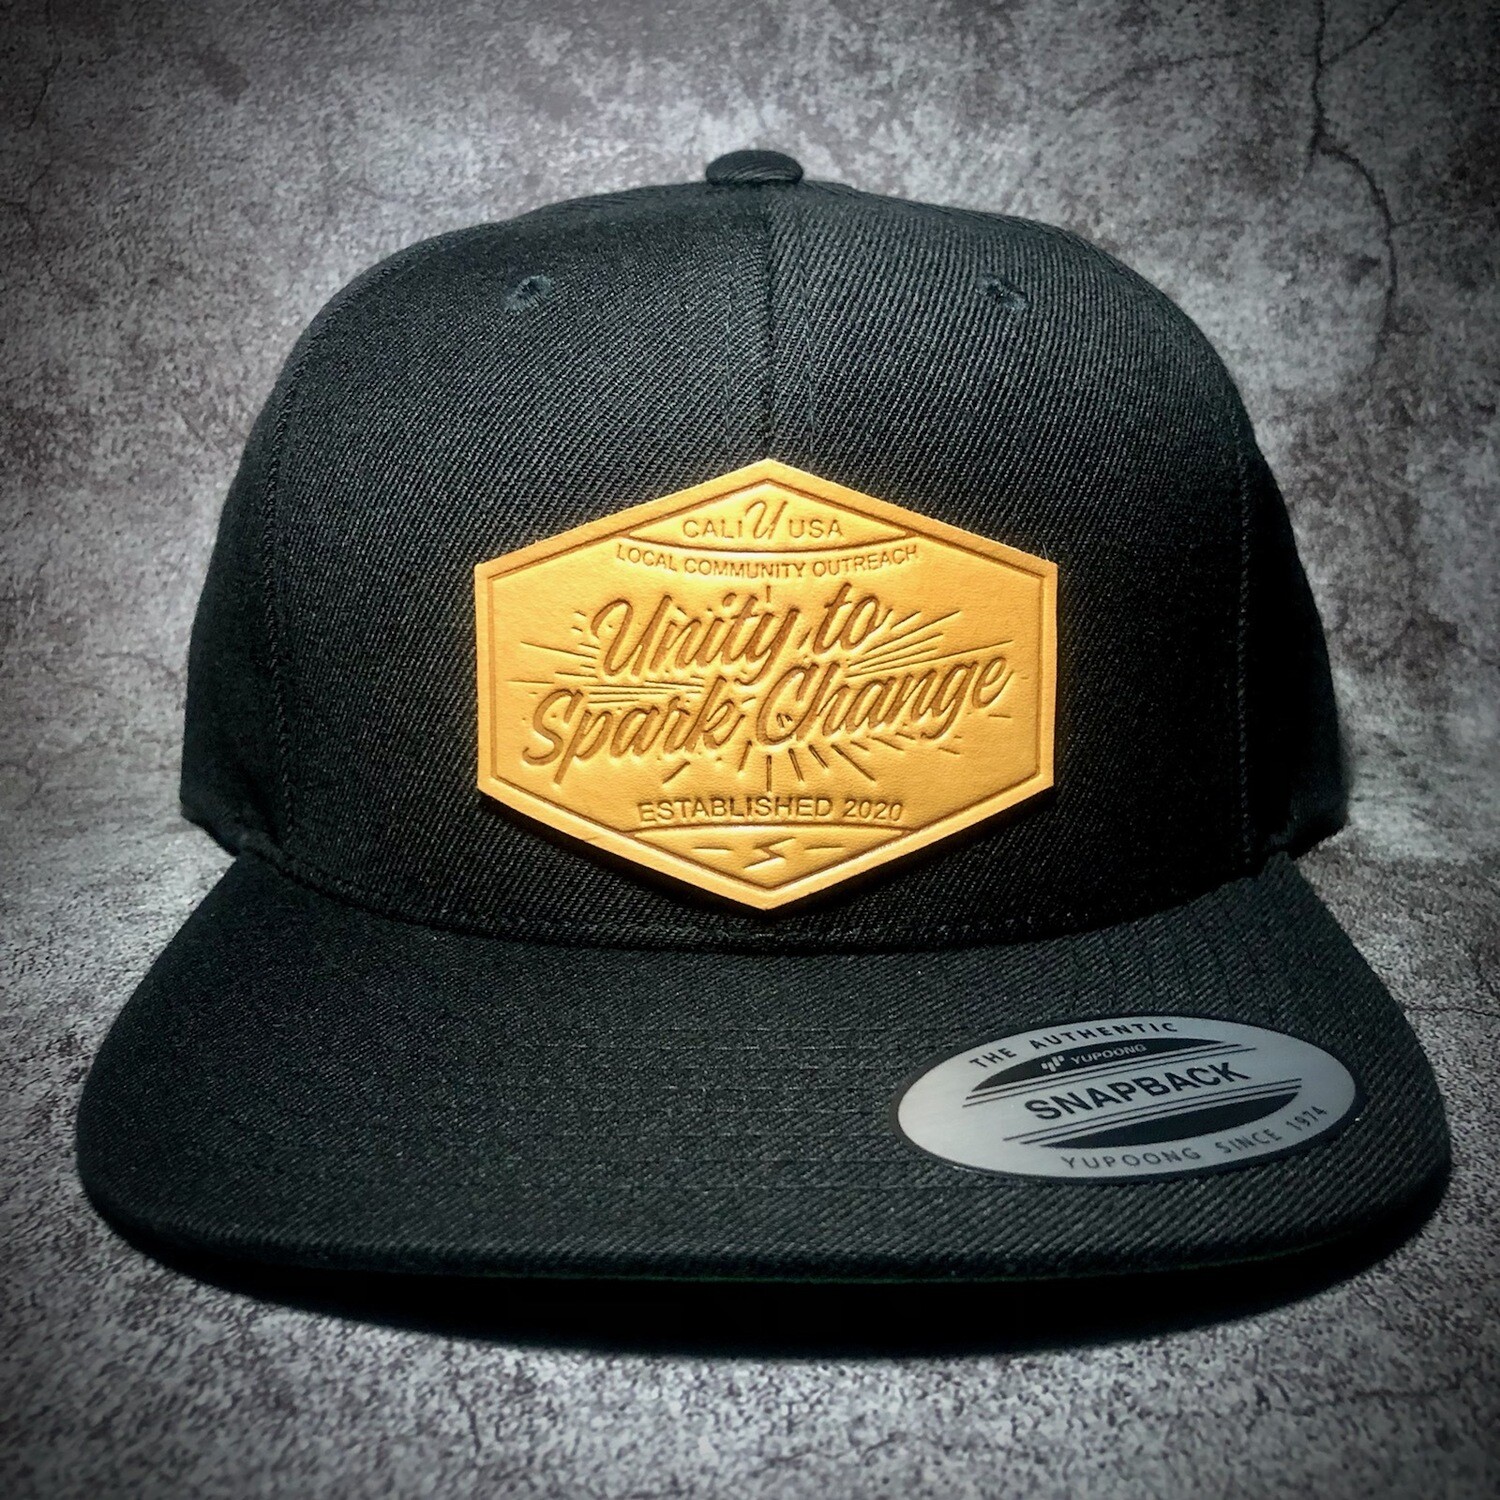 Black, Classic Snap Back. All tan customer leather patch